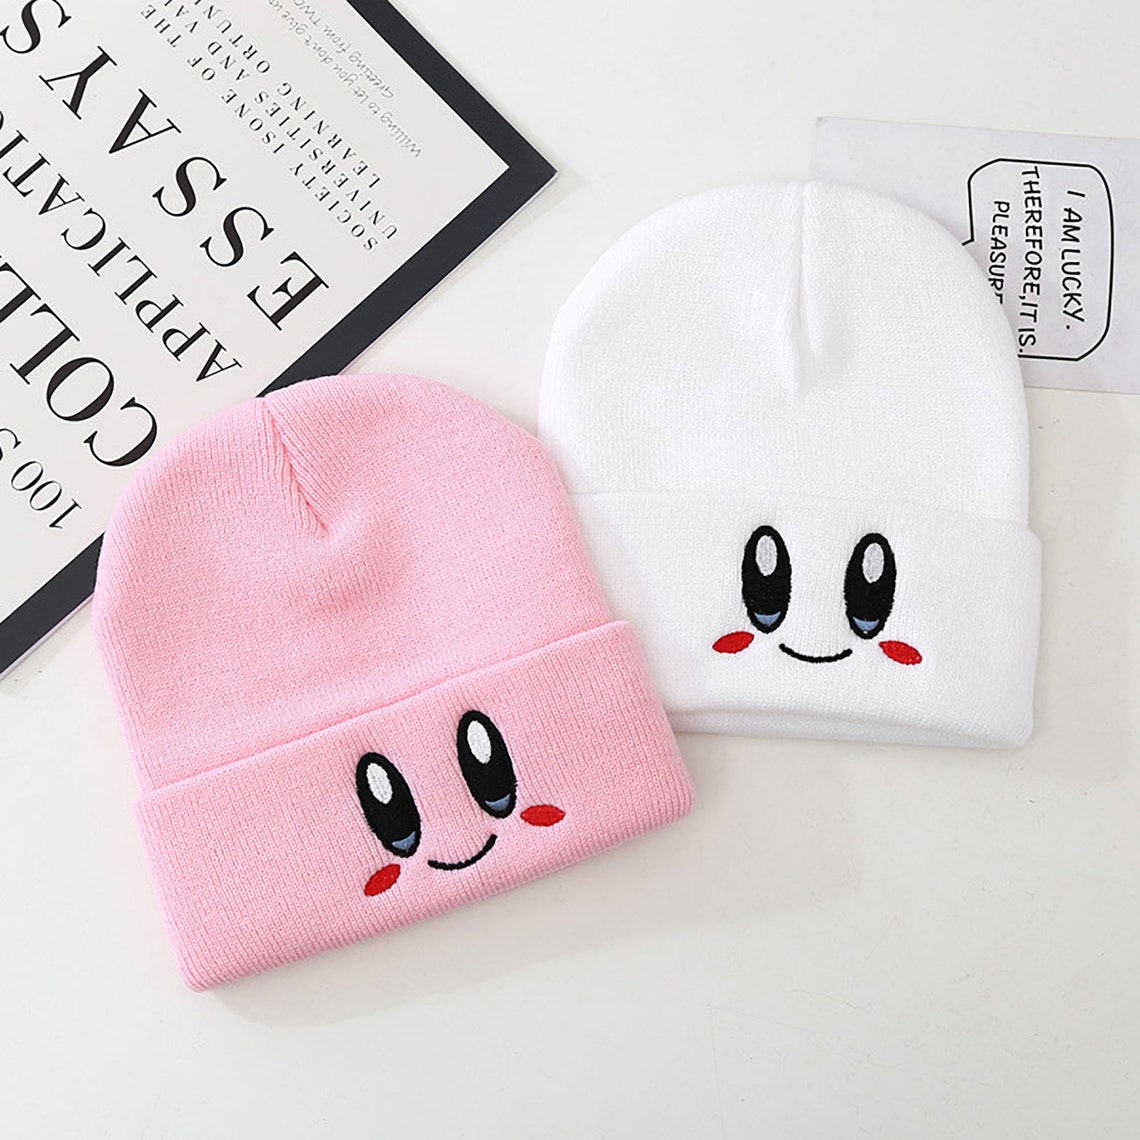 Kirby cute warm Pink Knit HatCute Casual Beanie Hat For | Etsy